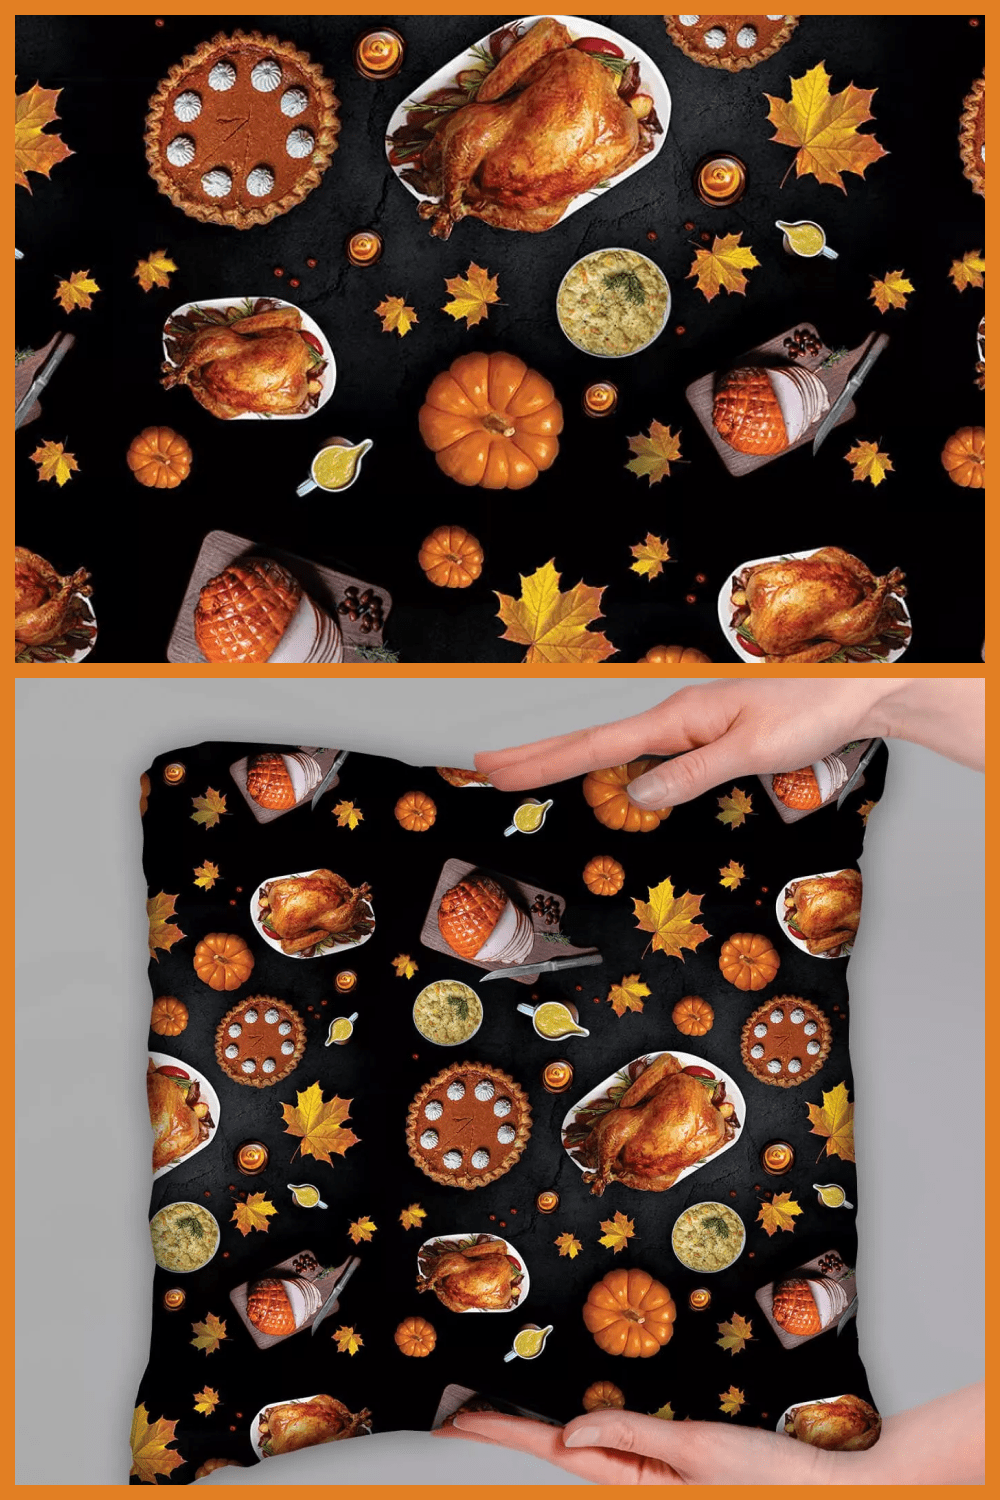 Images of turkey, pumpkin, pie, with yellow leaves on a black background.